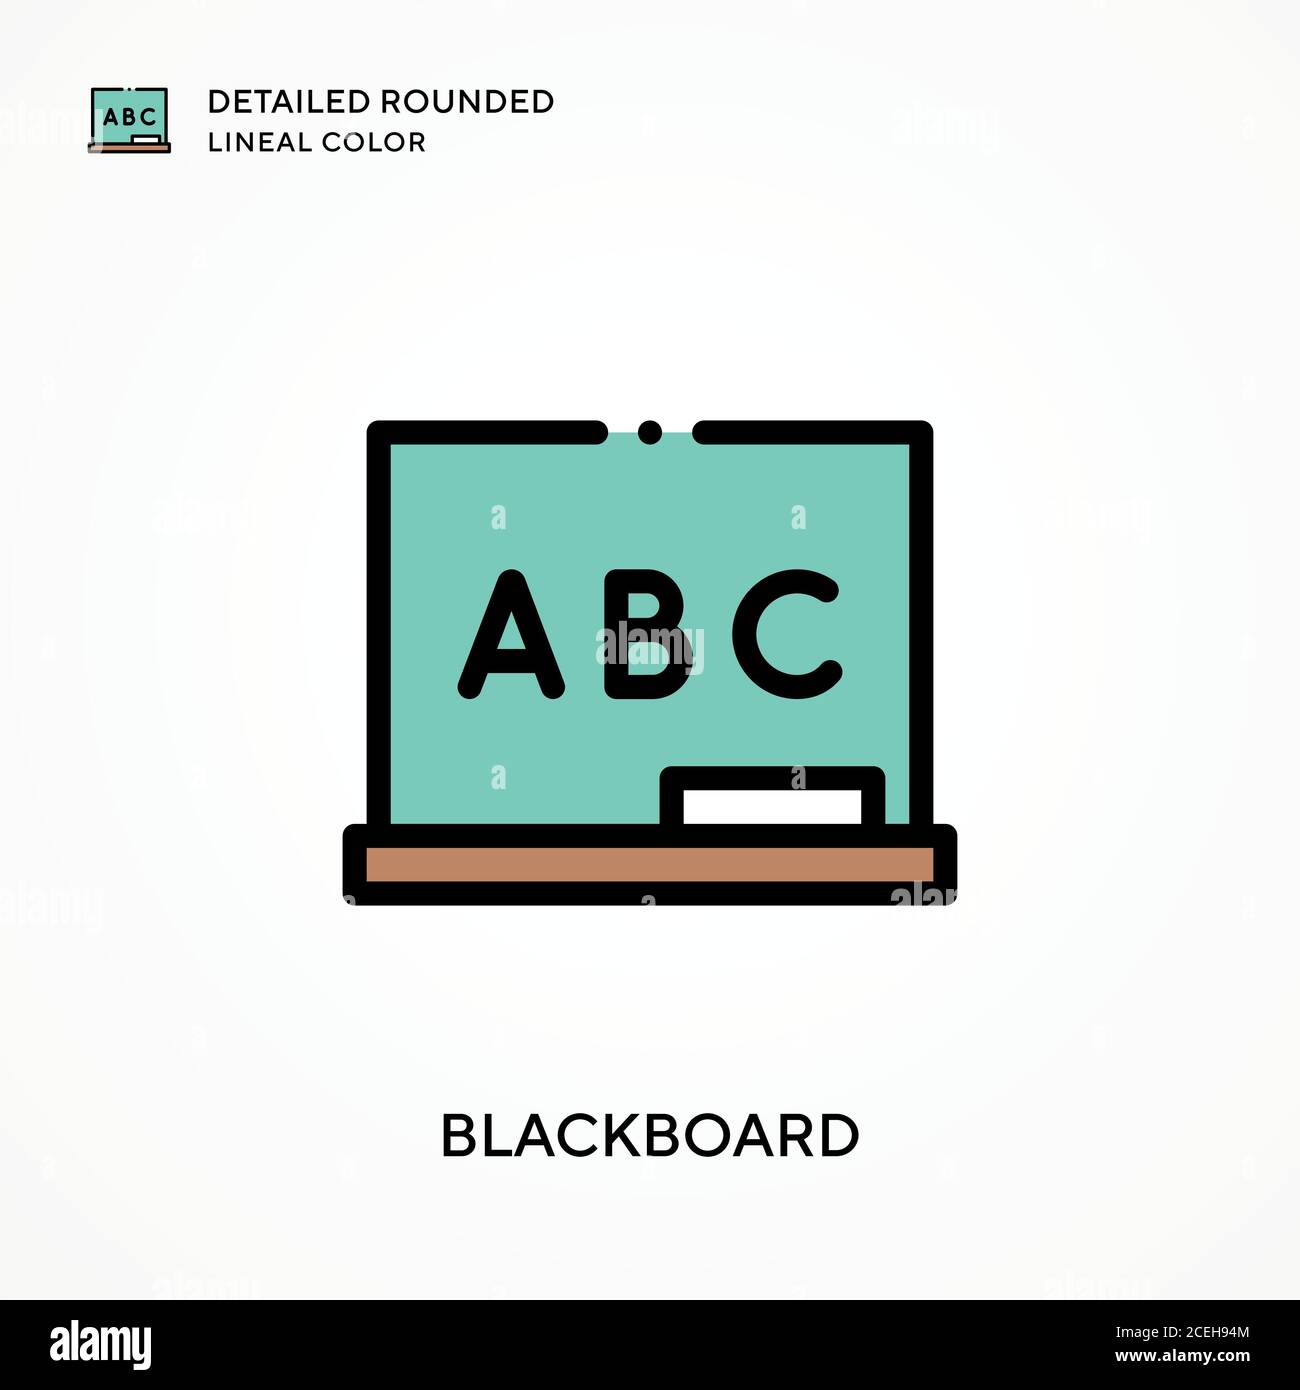 Blackboard detailed rounded lineal color. Modern vector illustration concepts. Easy to edit and customize. Stock Vector